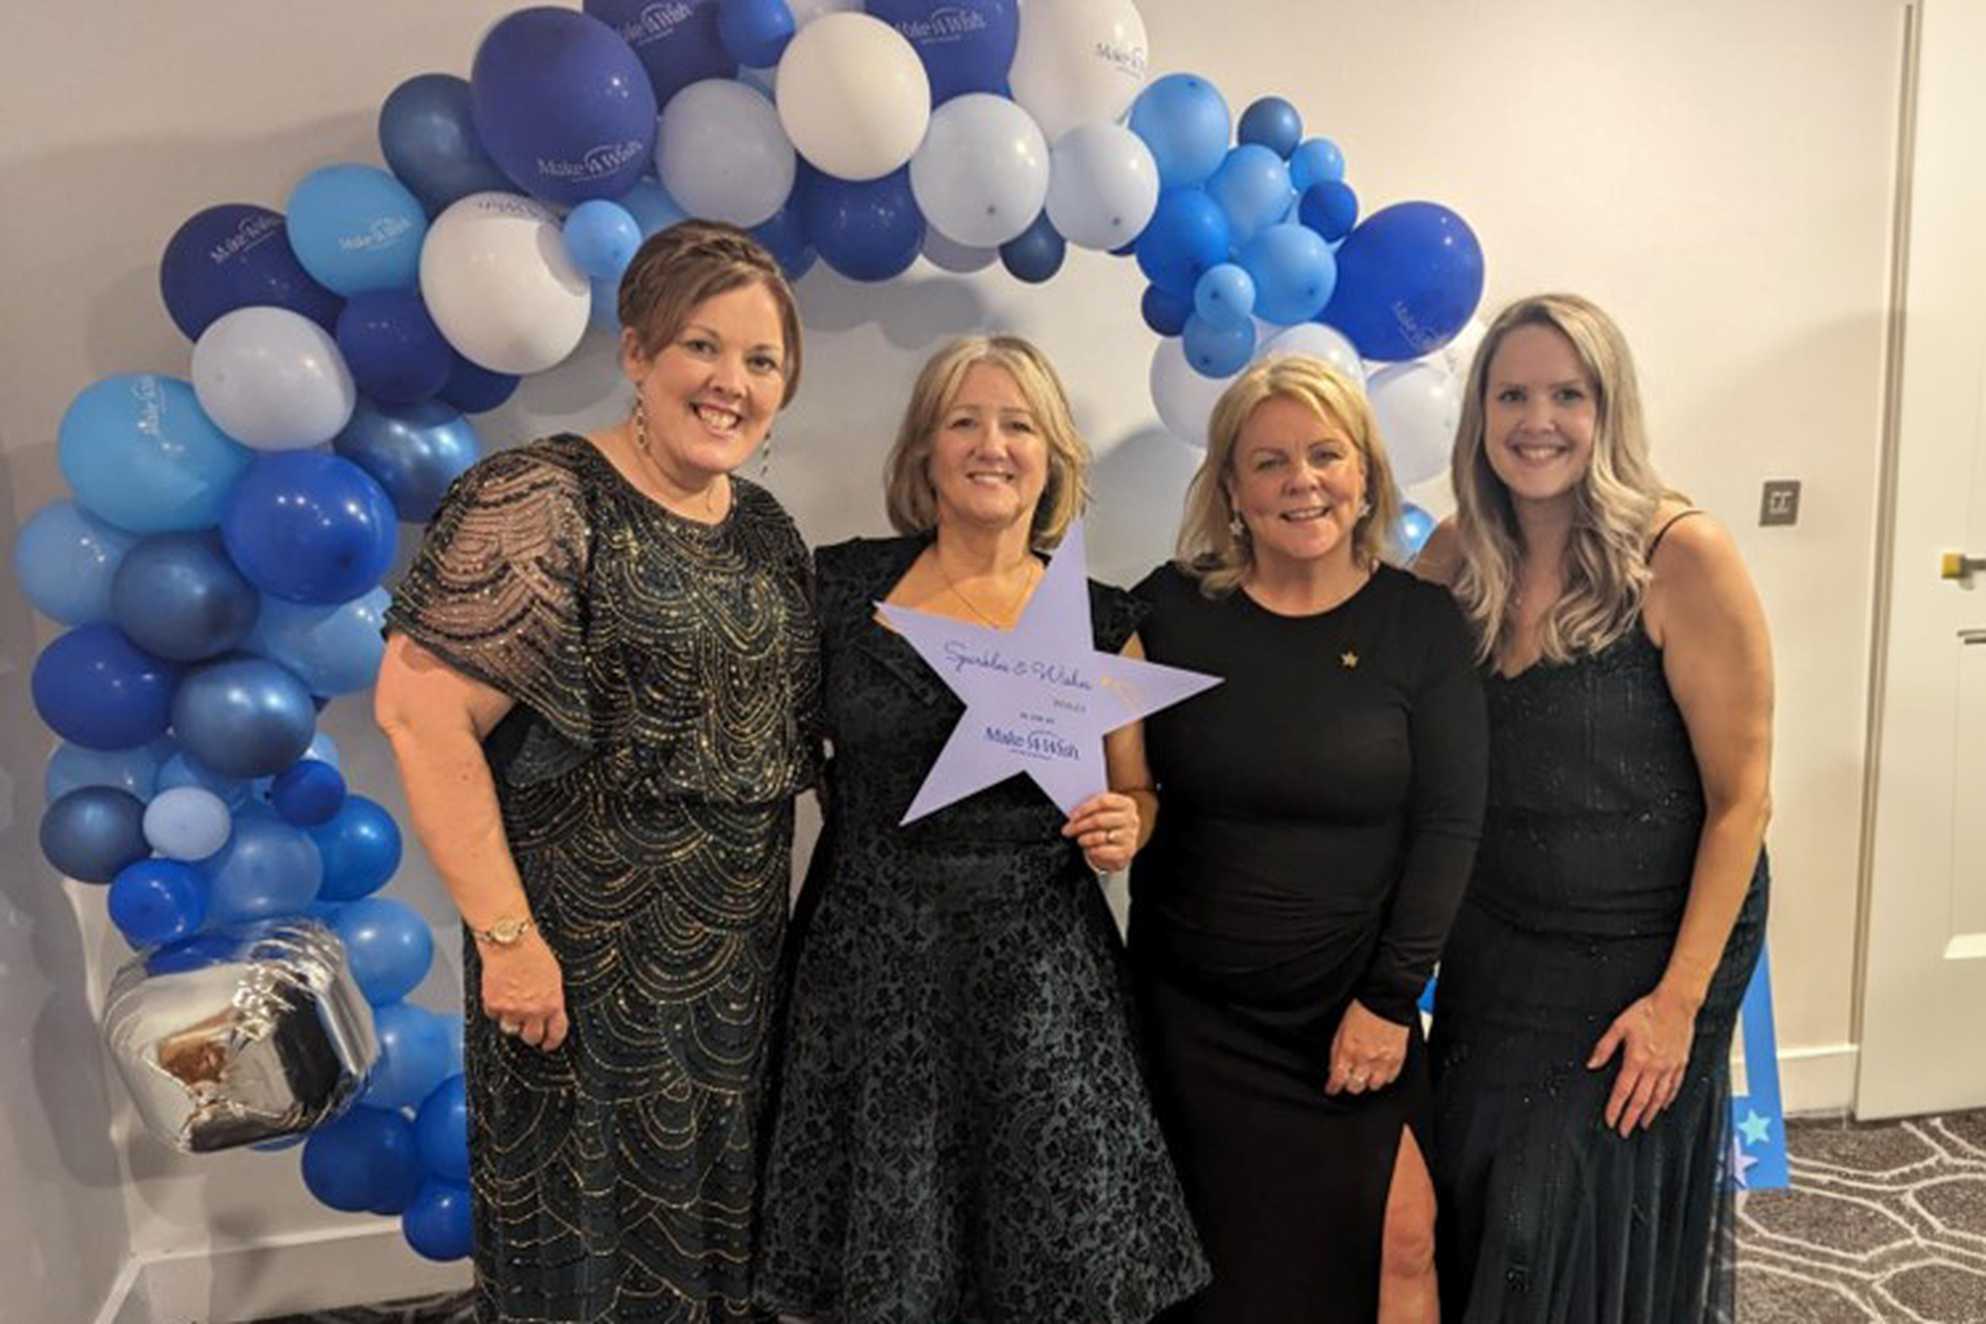 Make-A-Wish volunteers, Sian, Karen, Karen and Rhiannon standing in front of a blue balloon arch in their ball gowns.